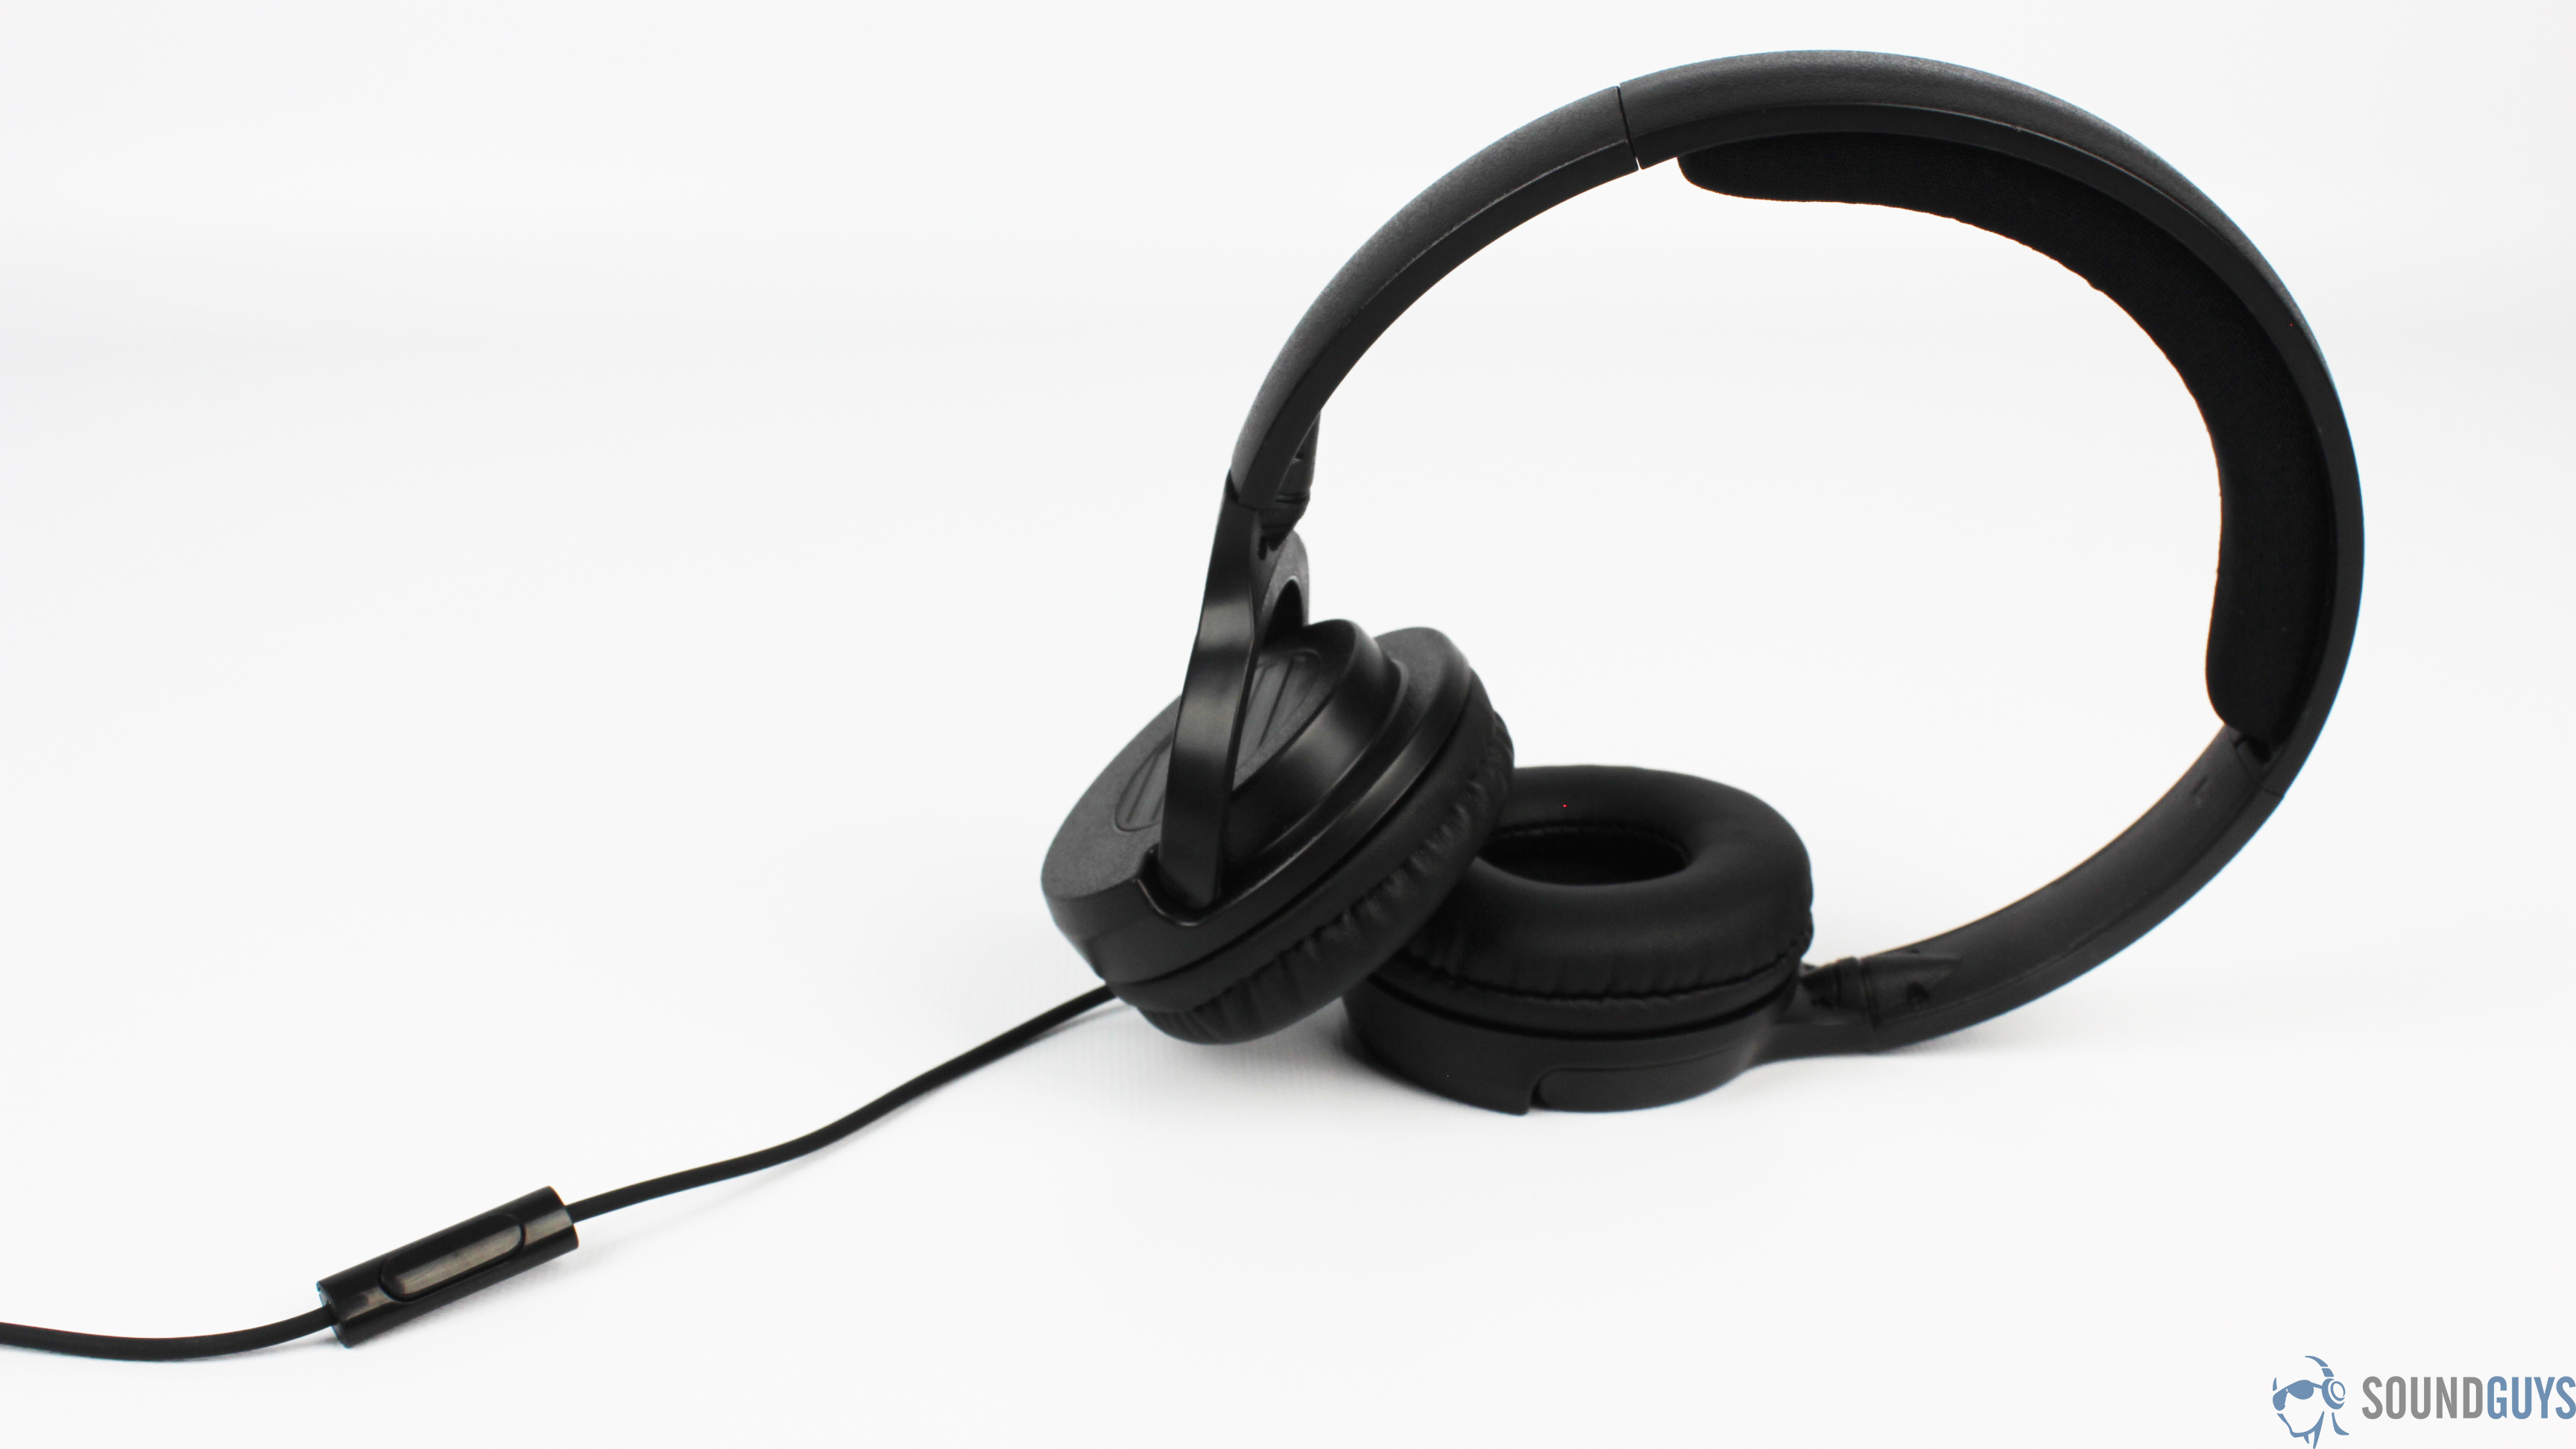 The Monoprice Hi-Fi On-Ear headphones in full view, stand on an ear cup with the wire in frame.